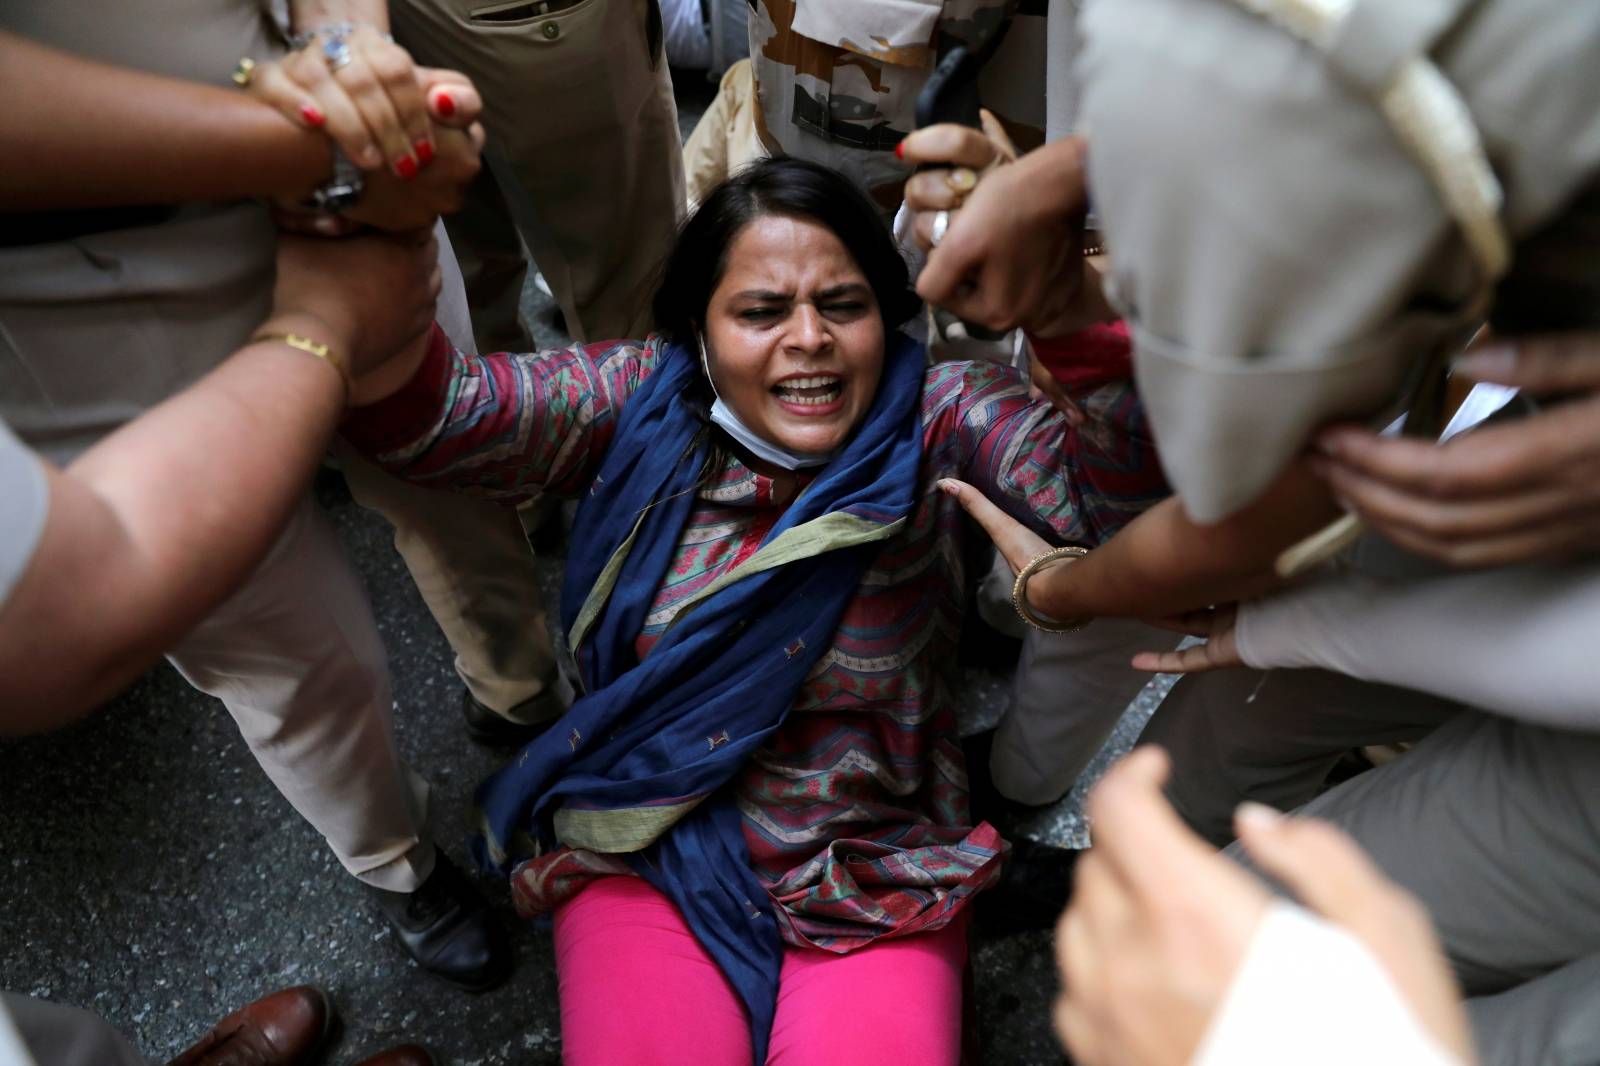 Protest after the death of a rape victim in New Delhi